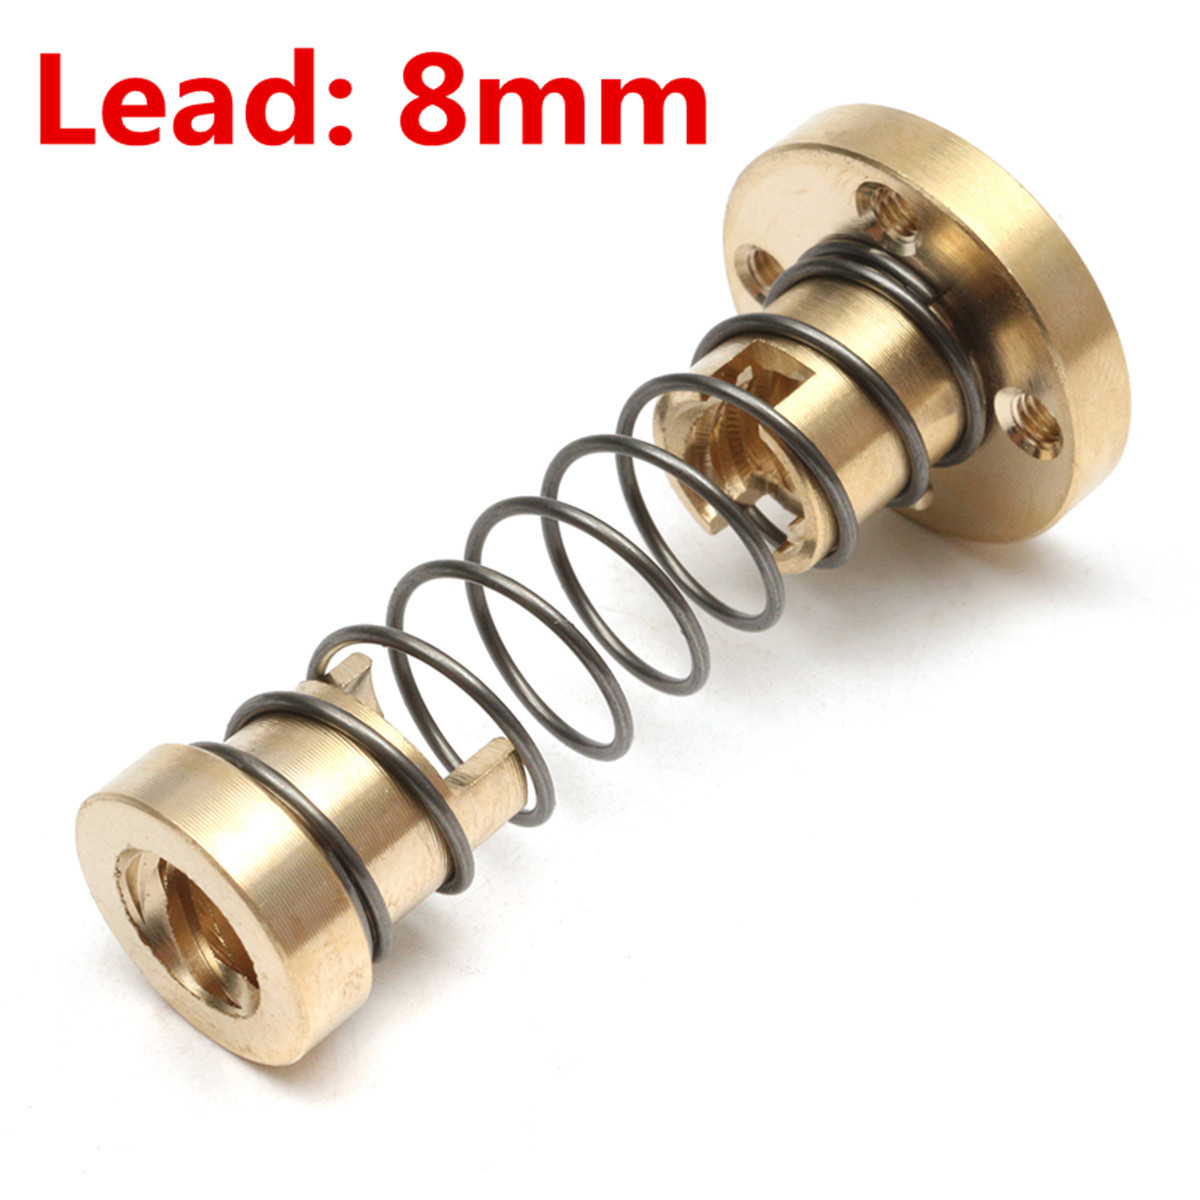 2mm Pitch 8mm Lead 4-Pack Silent T8 Lead Screw POM nut 8mm Lead Tr8x8 Acme Thread Screw Nuts Replacing Brass nut for 3D Printer Z Axis CNC